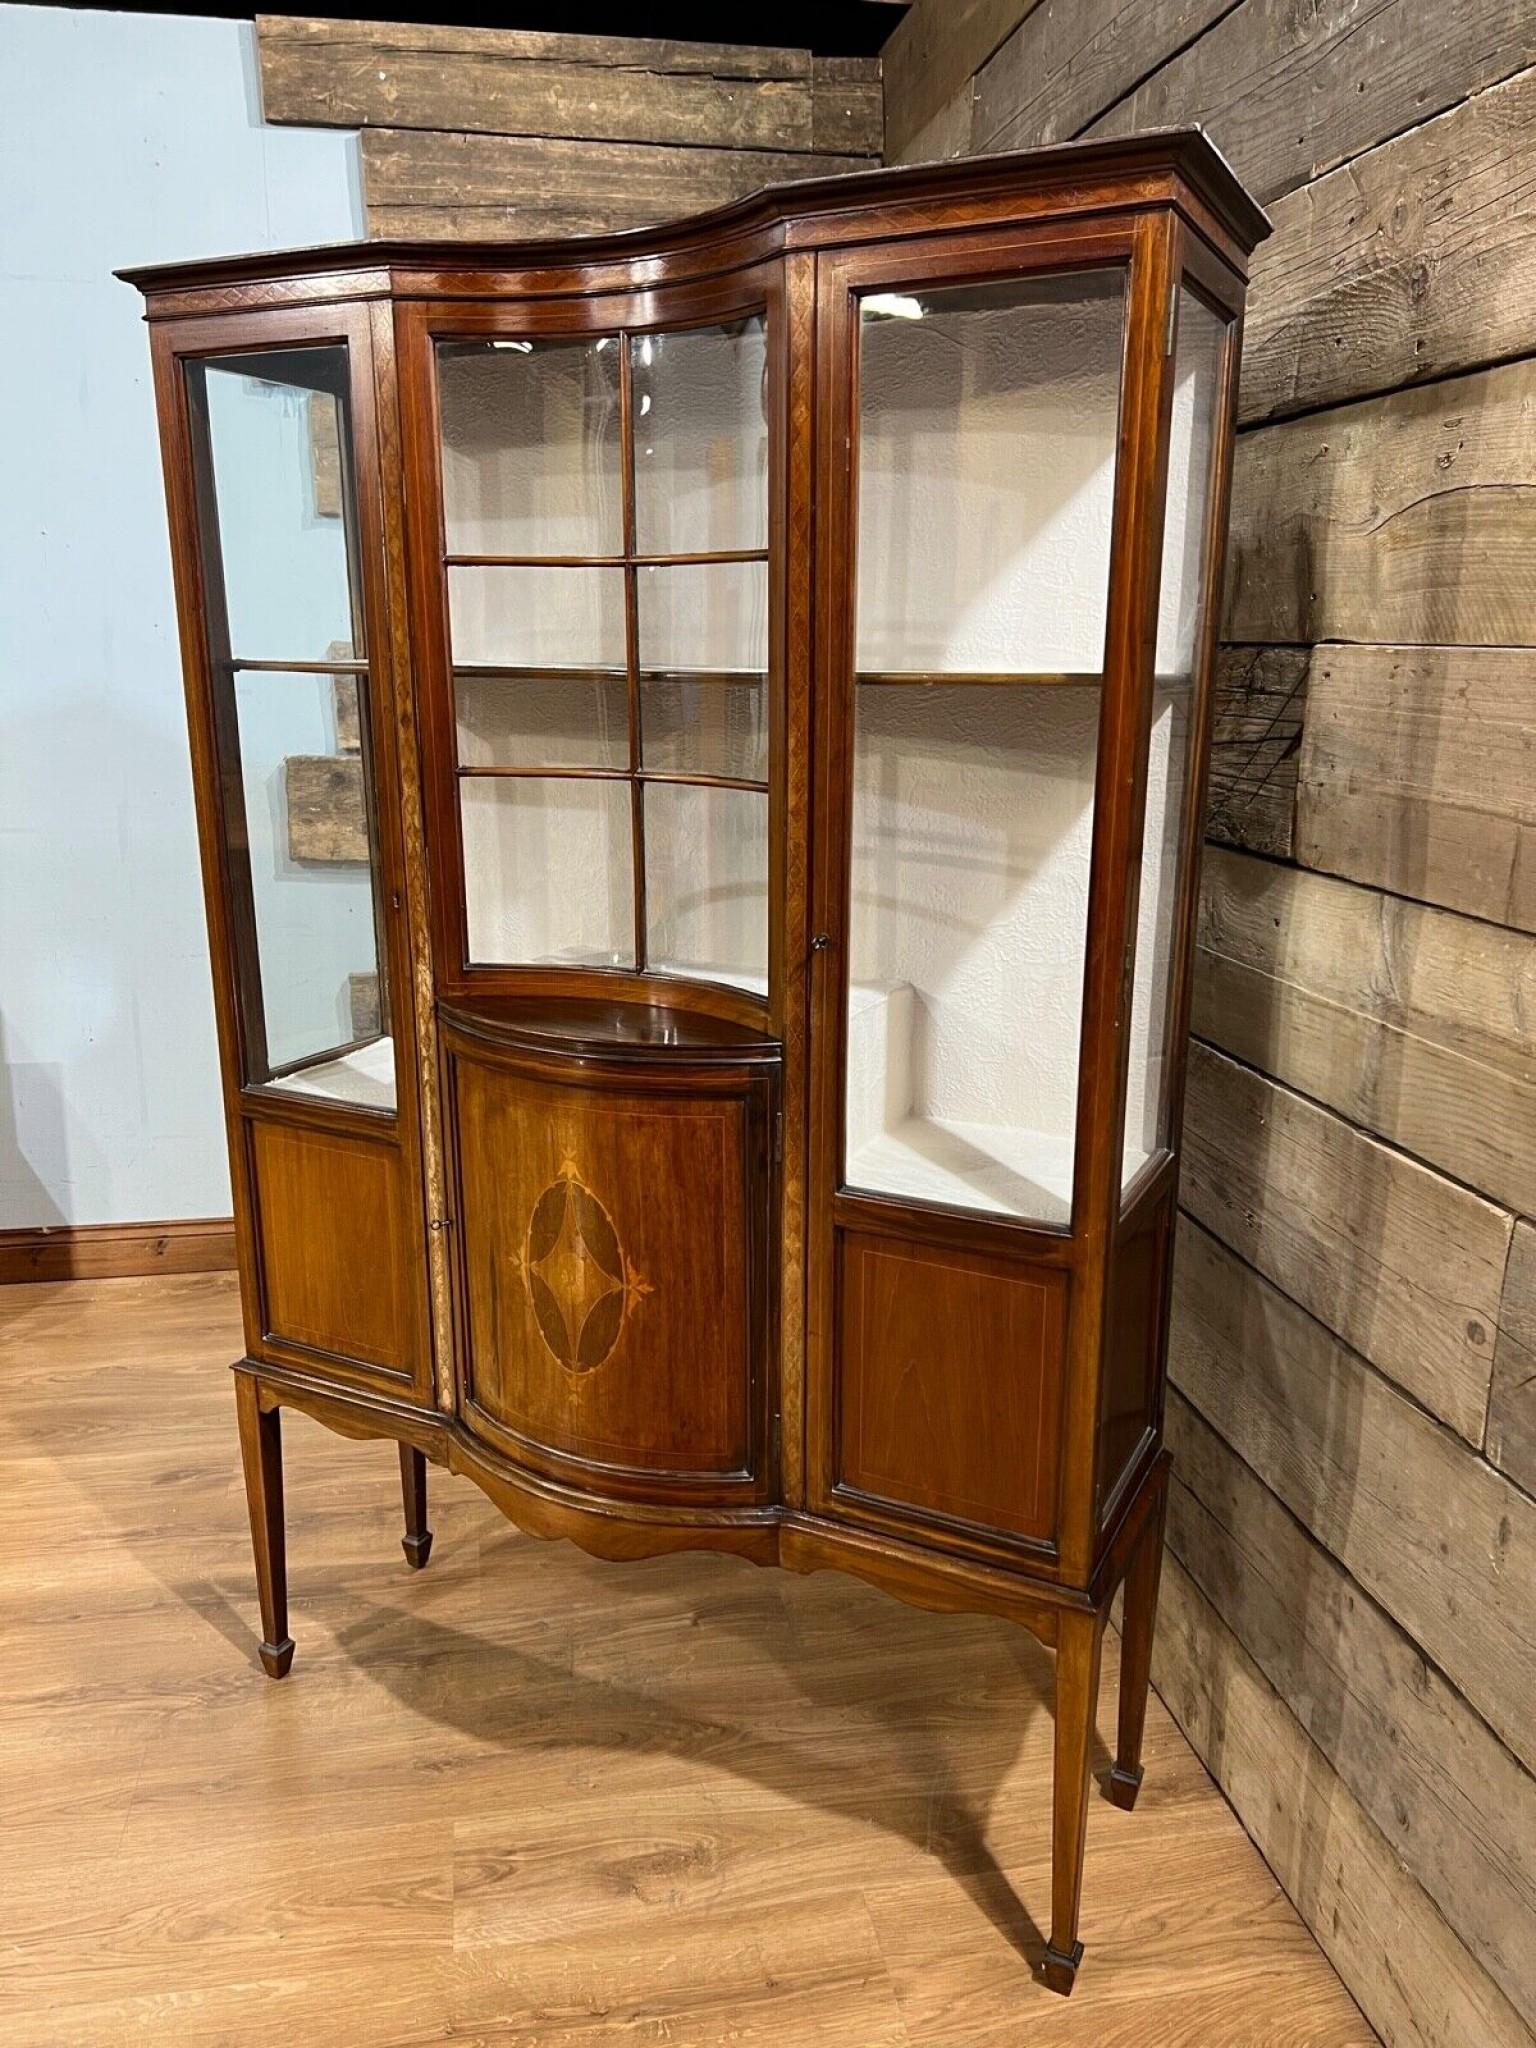 Gorgeous period Edwardian display cabinet in mahogany
Features intricate inlay work
Two doors open out either side of the central section which features curved glass
Circa 1900 on this clean antique cabinet
Offered in great shape ready for home use